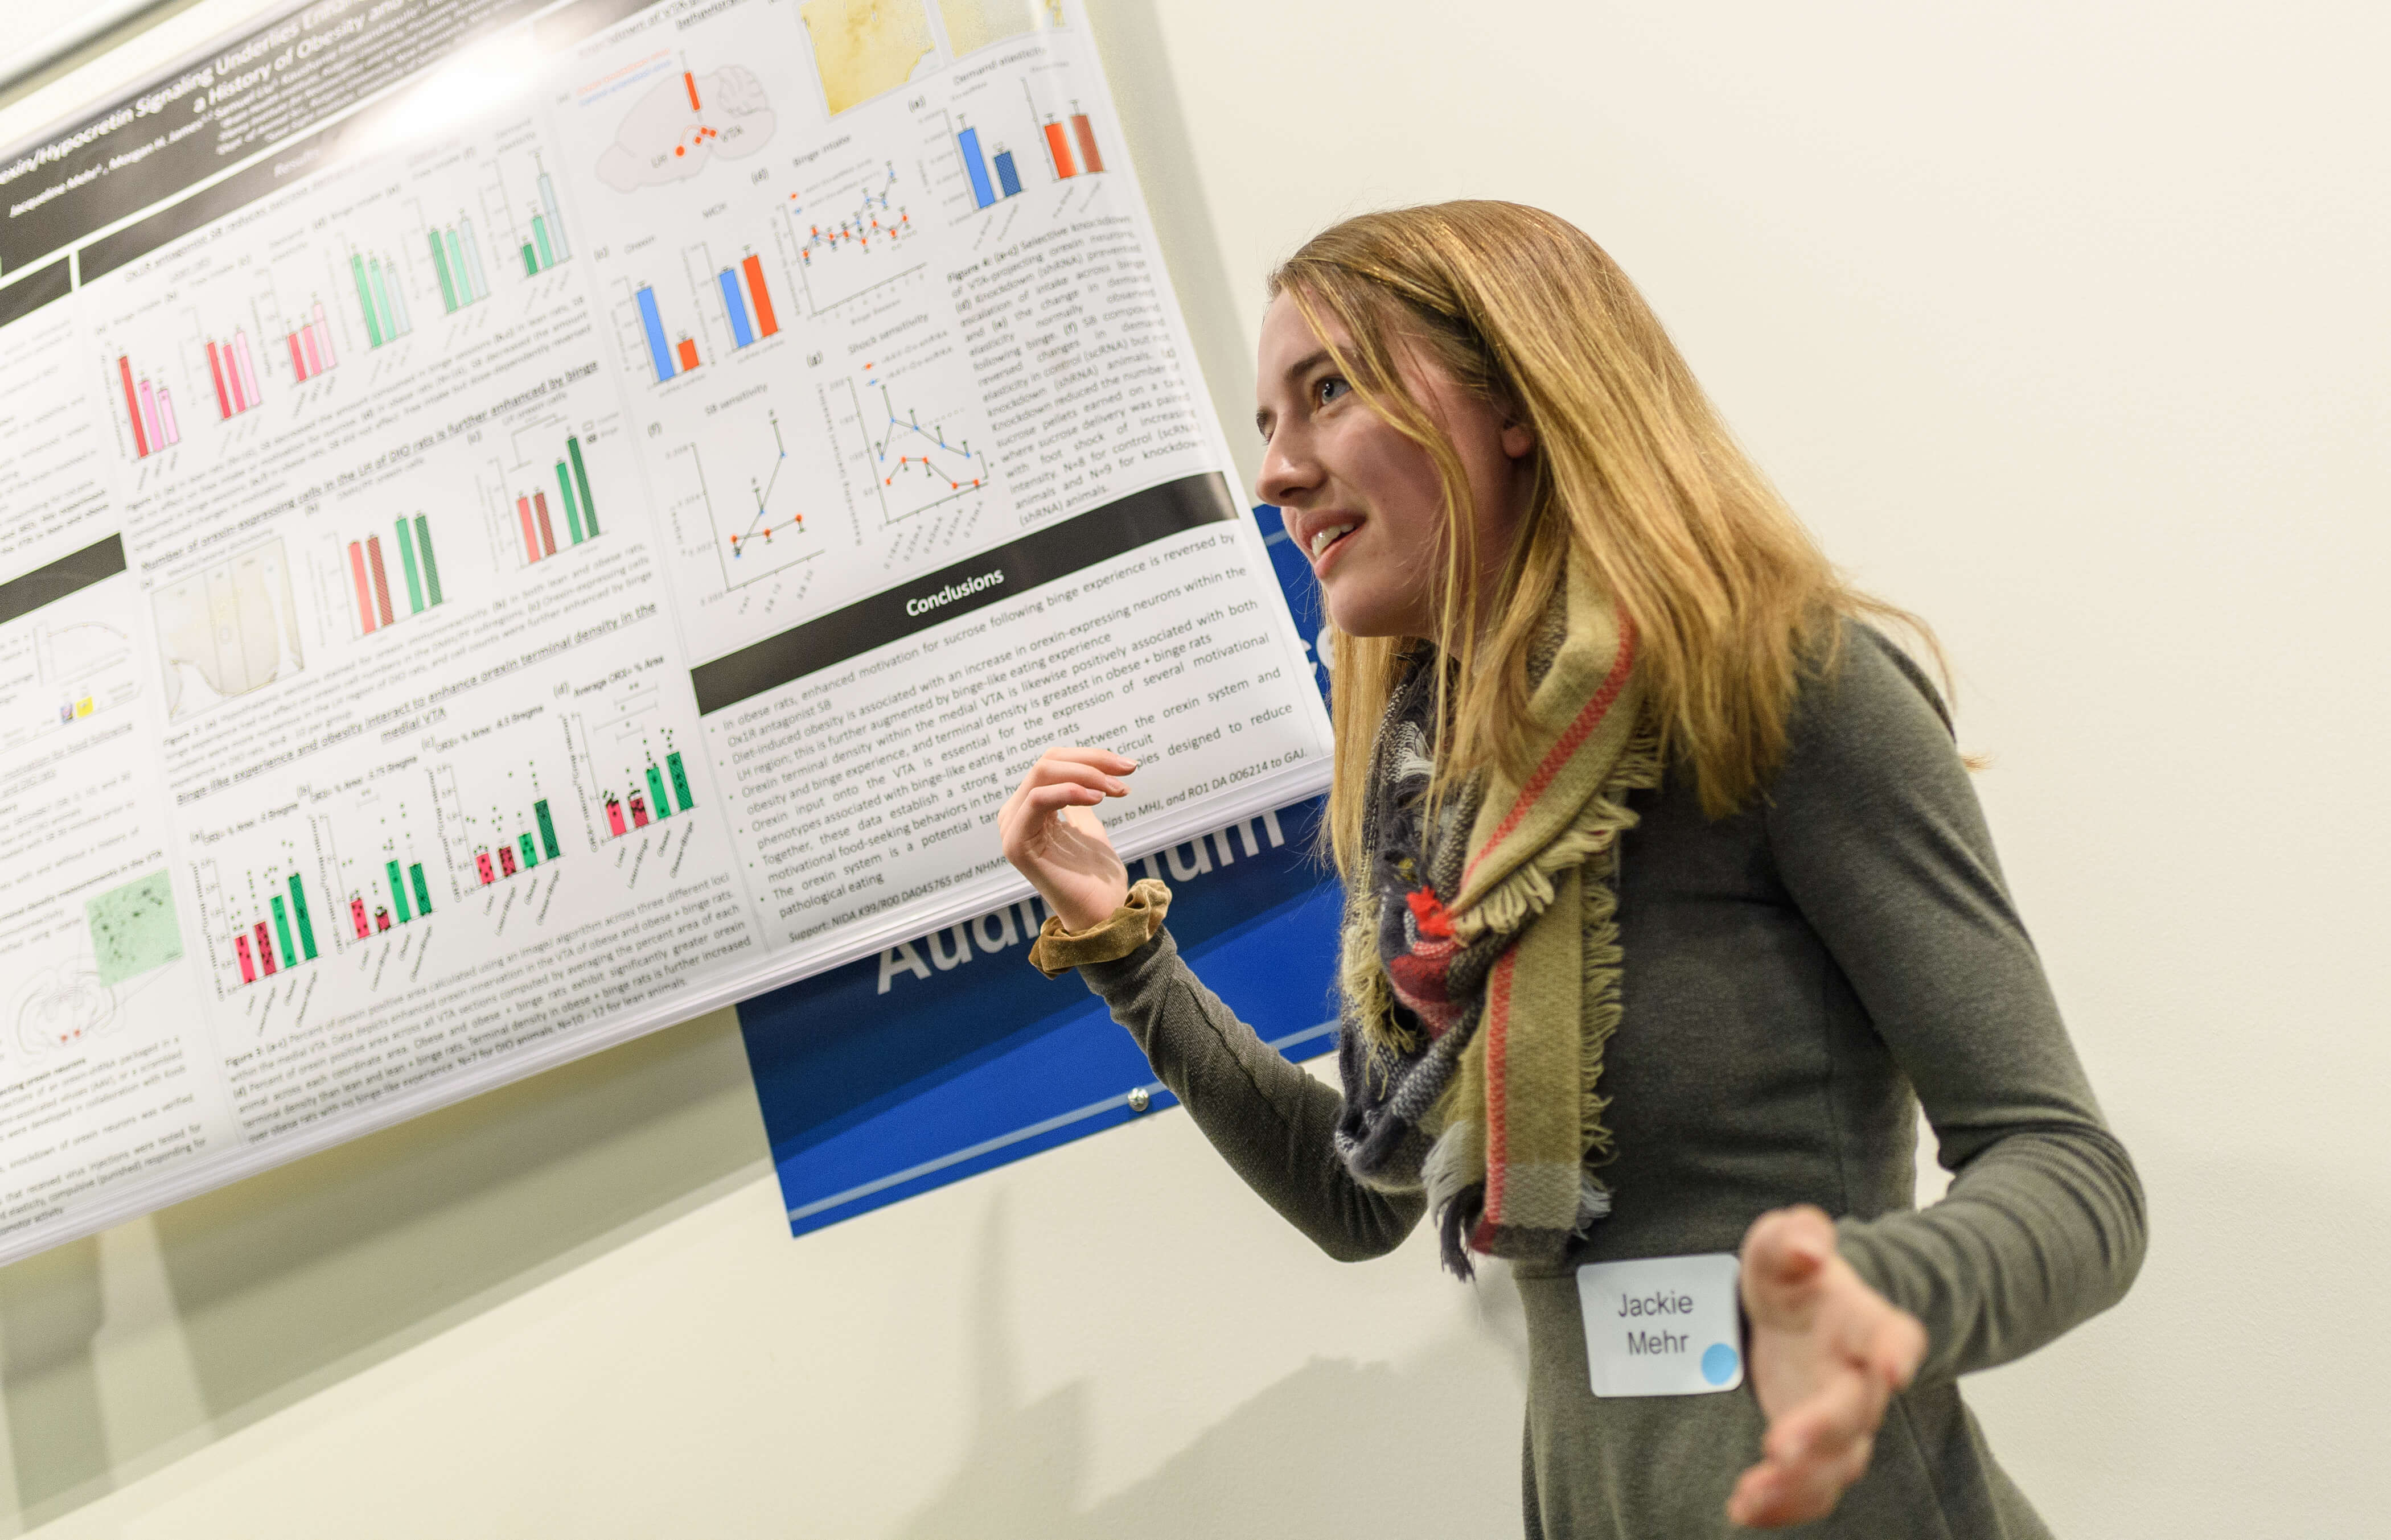 Students give presentations during various workshops at the Quinnipiac University School of Medicine Neuron Conference.